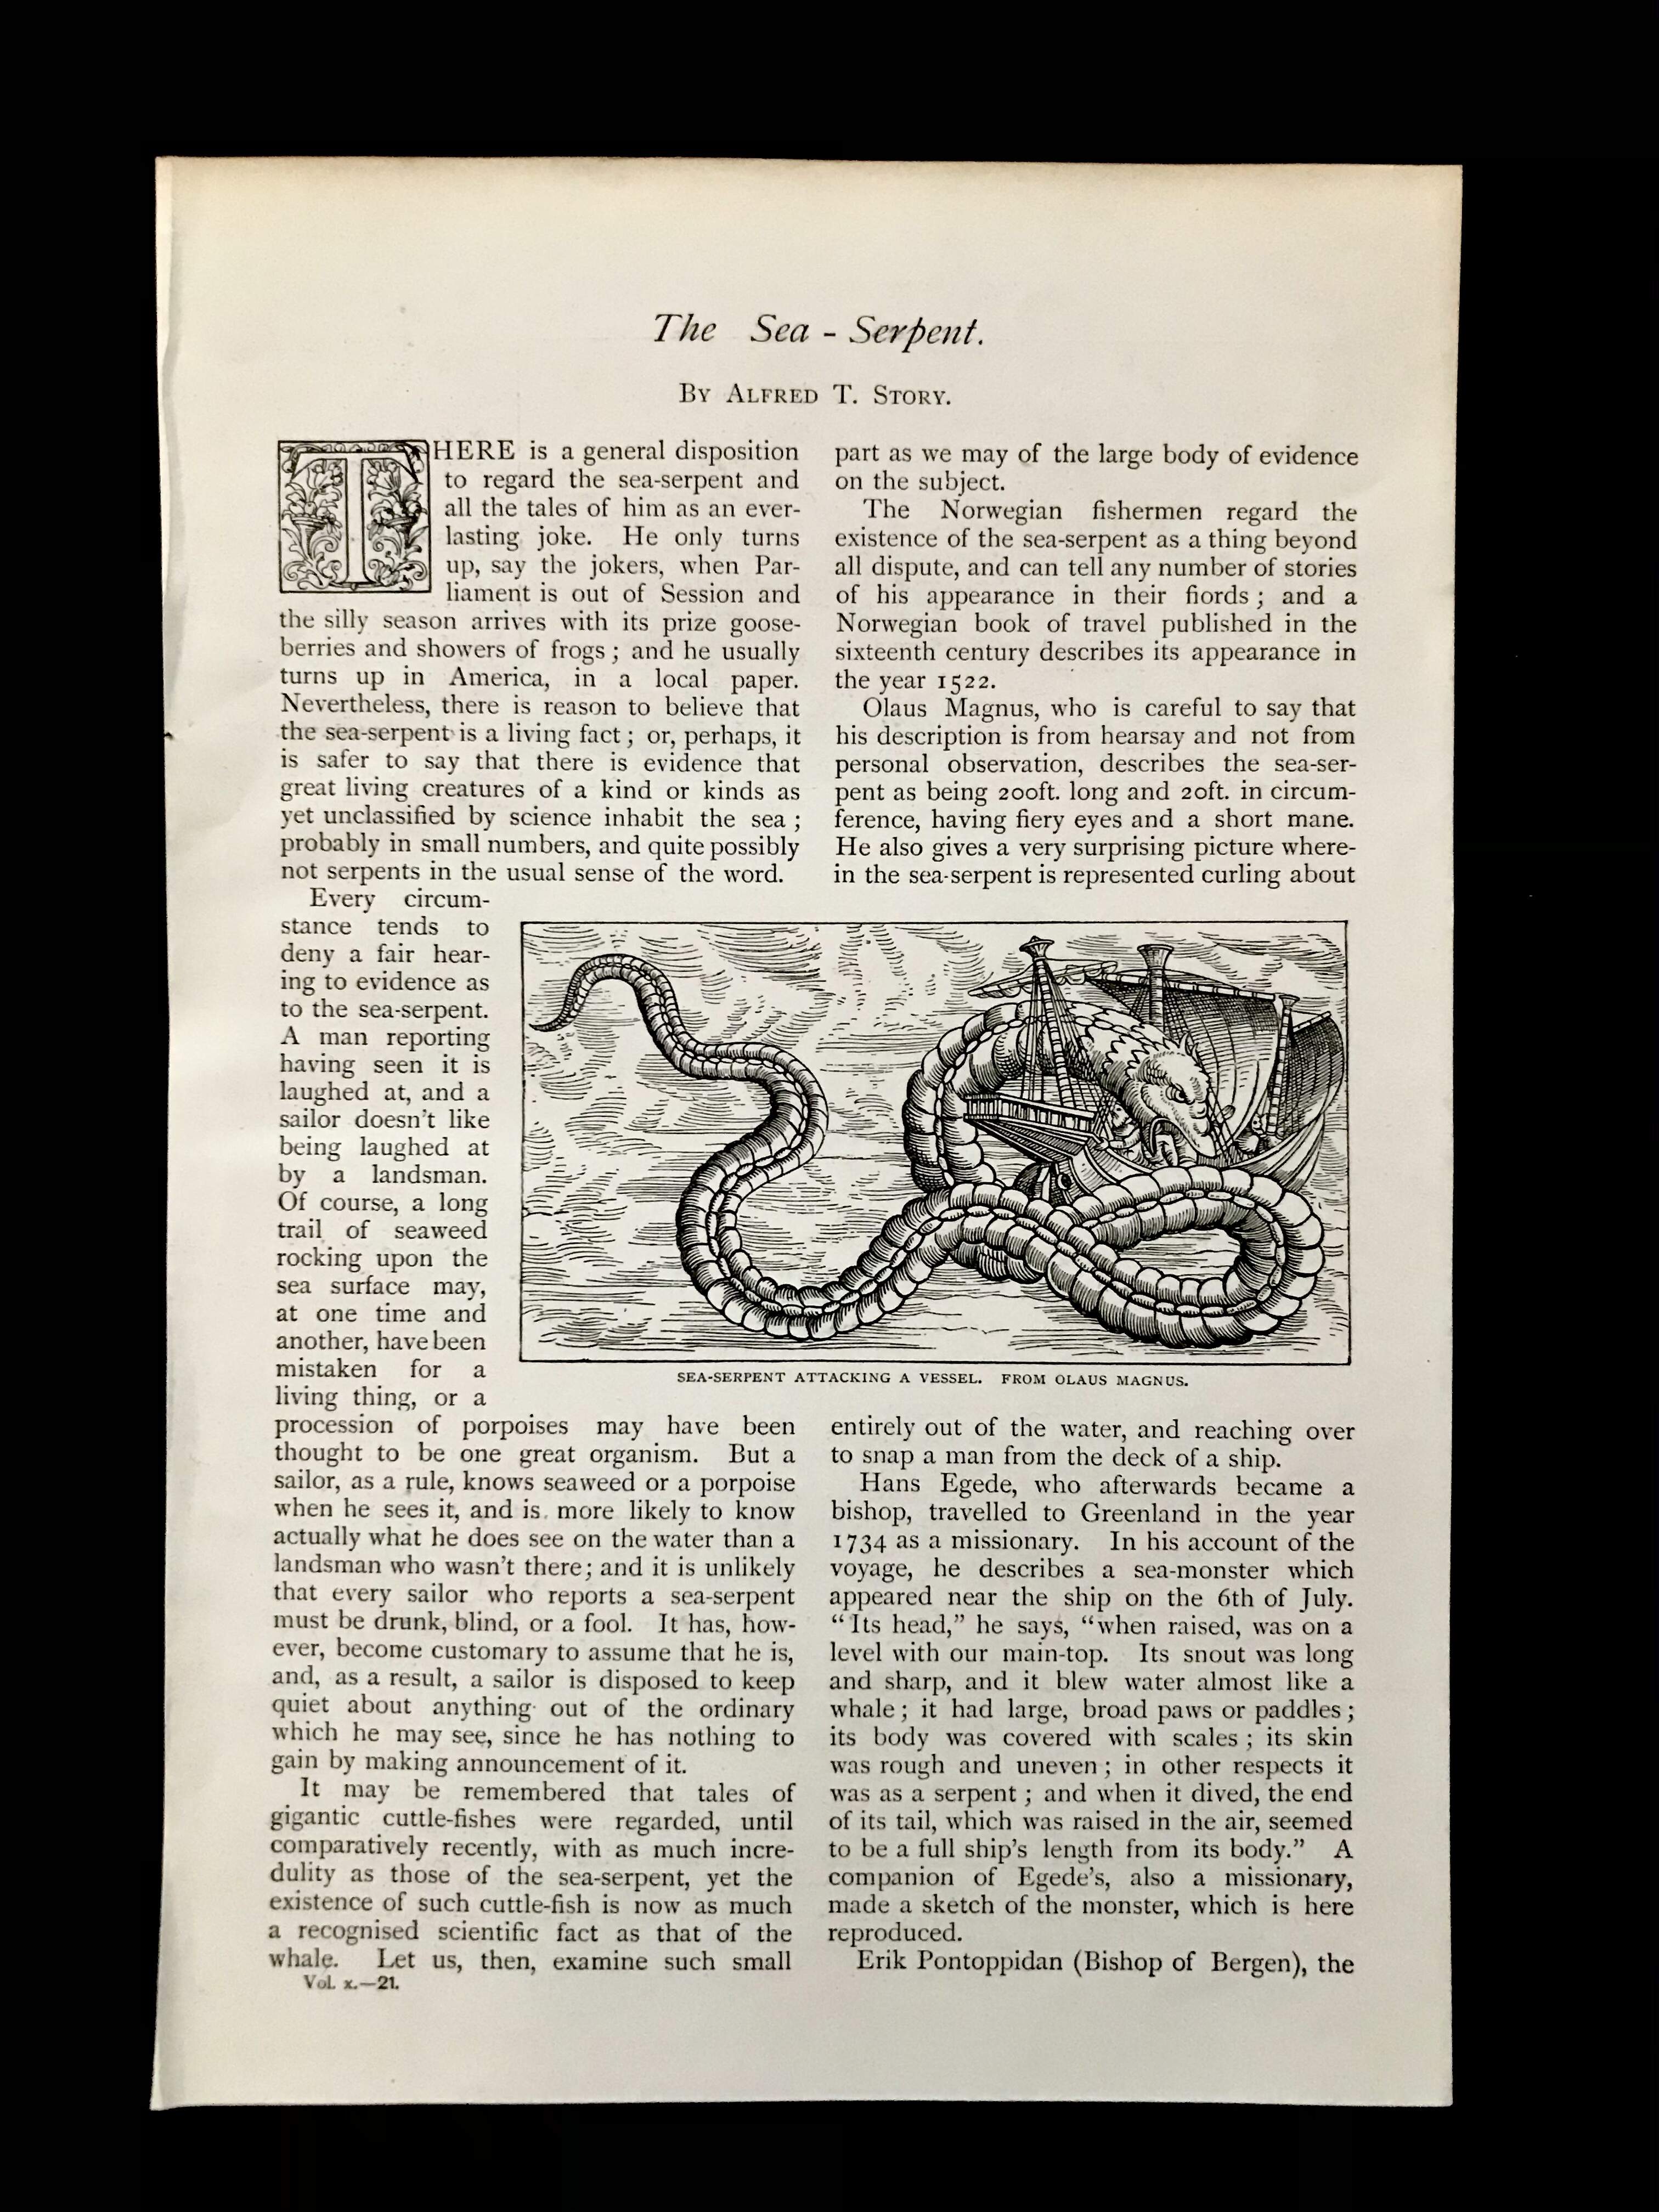 The Sea-Serpent by Alfred T. Story Magazine Article